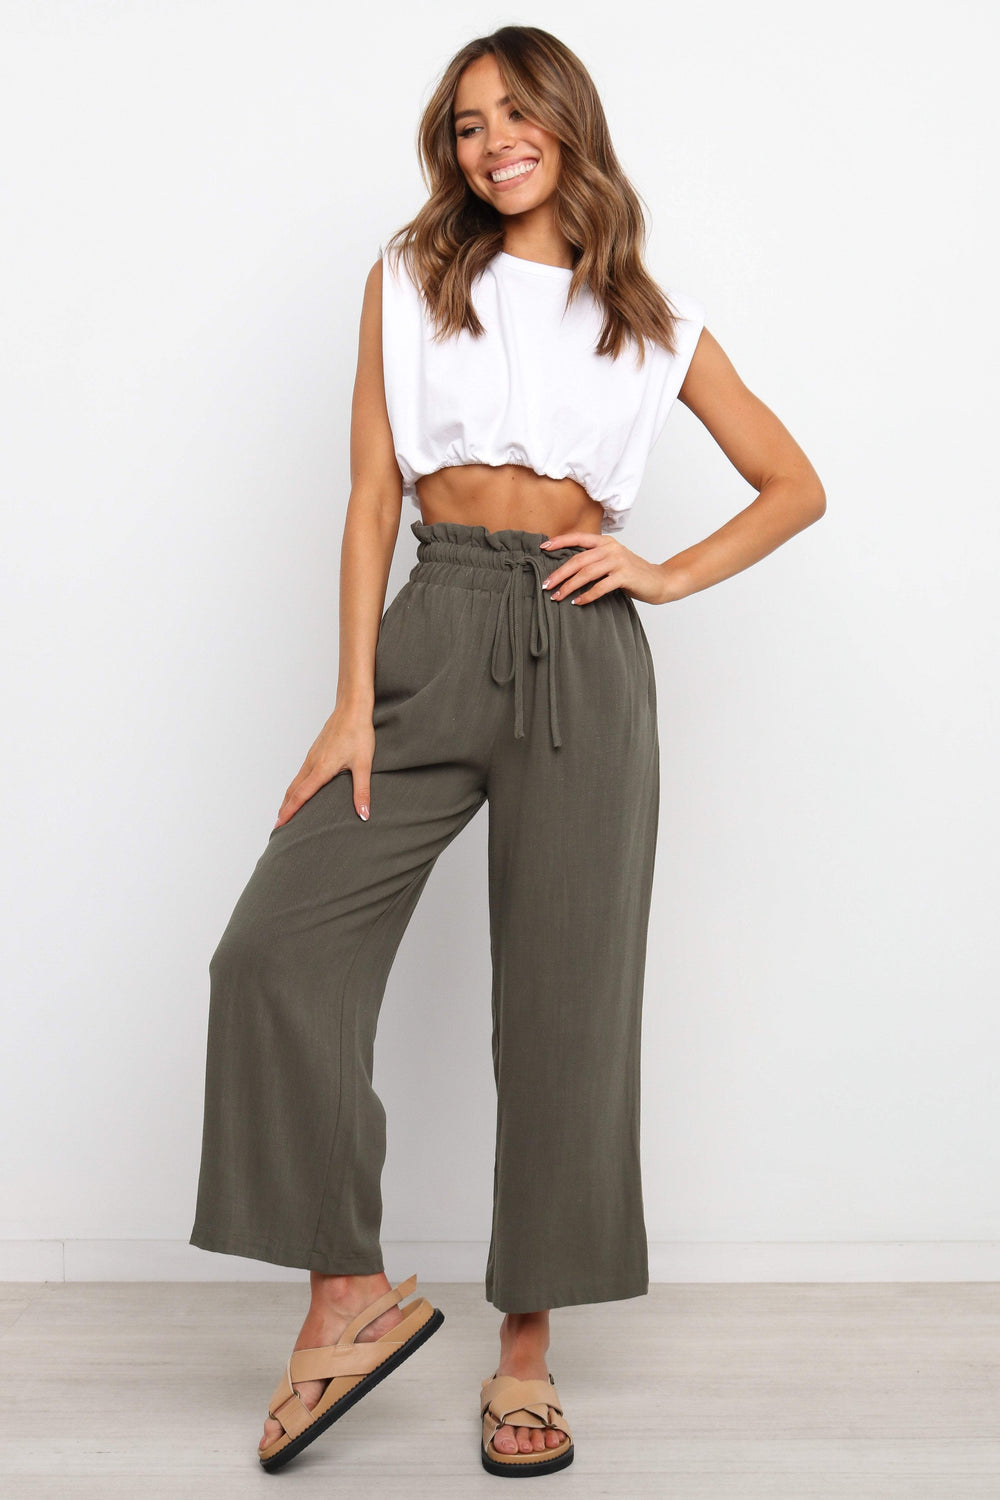 Petal and Pup USA BOTTOMS Hawthorne Pant - Olive